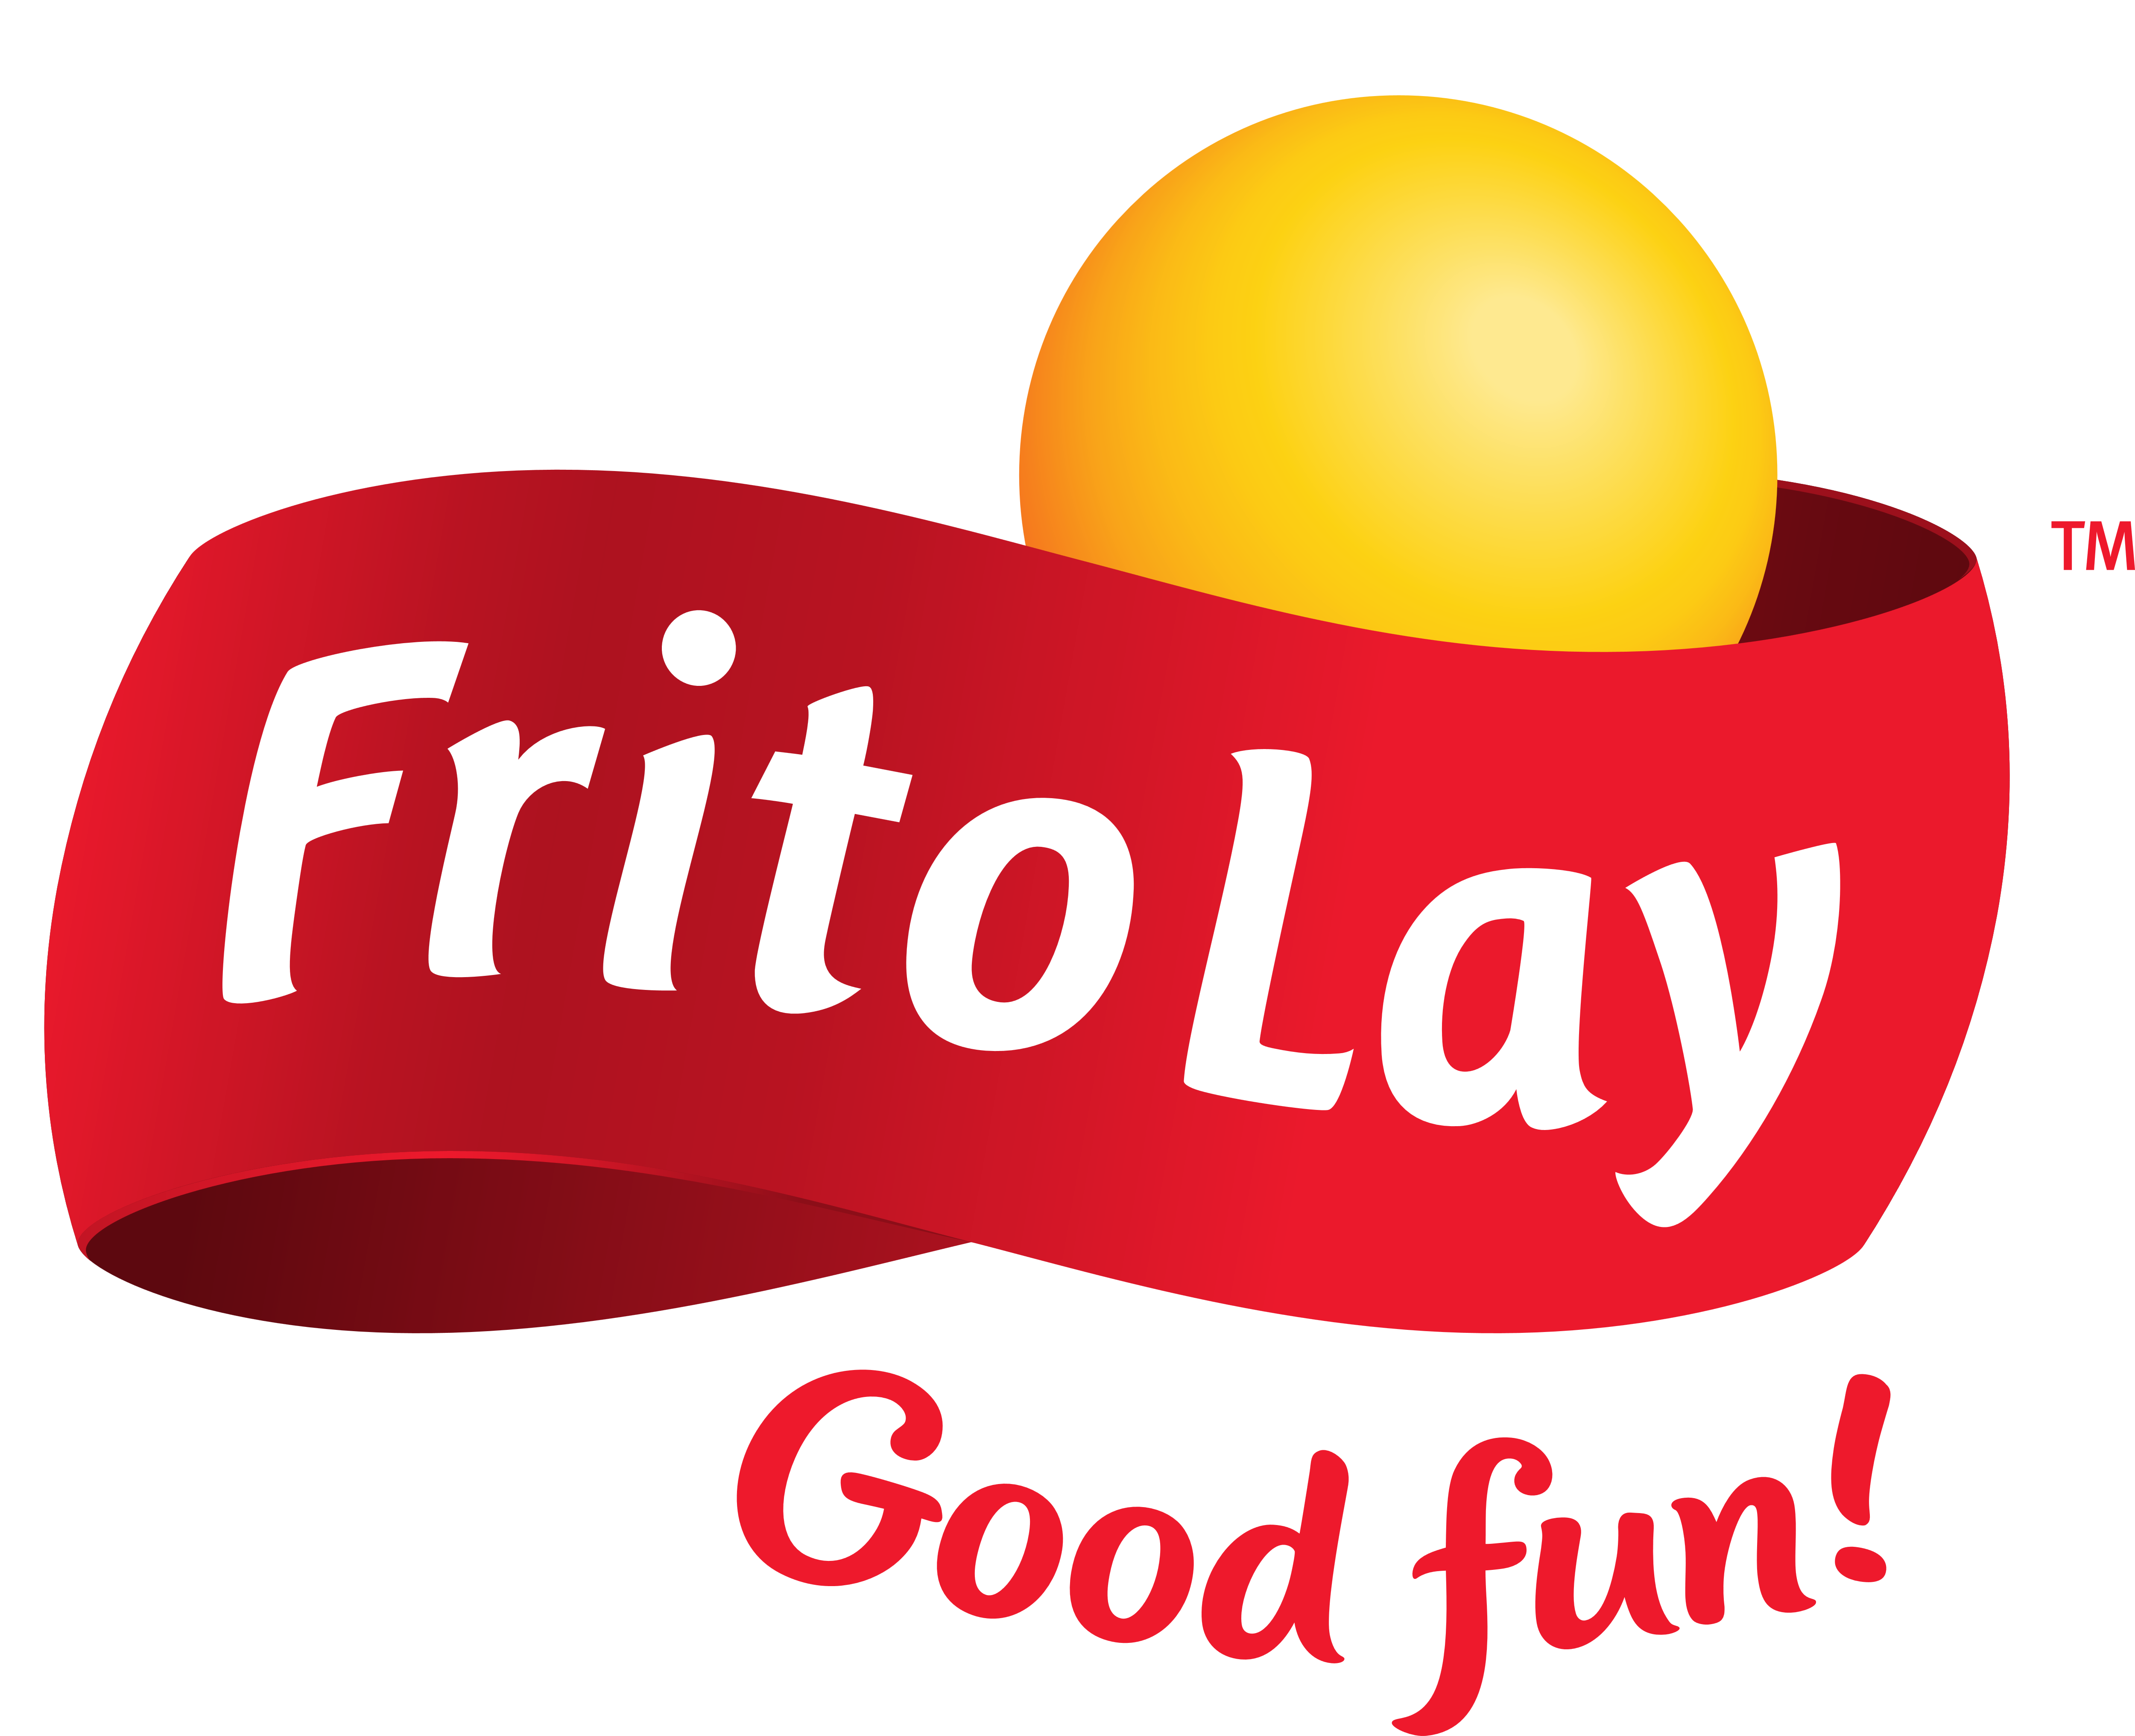 Frito-Lay North America is Regional Supporter of FIFA World Cup Qatar 2022